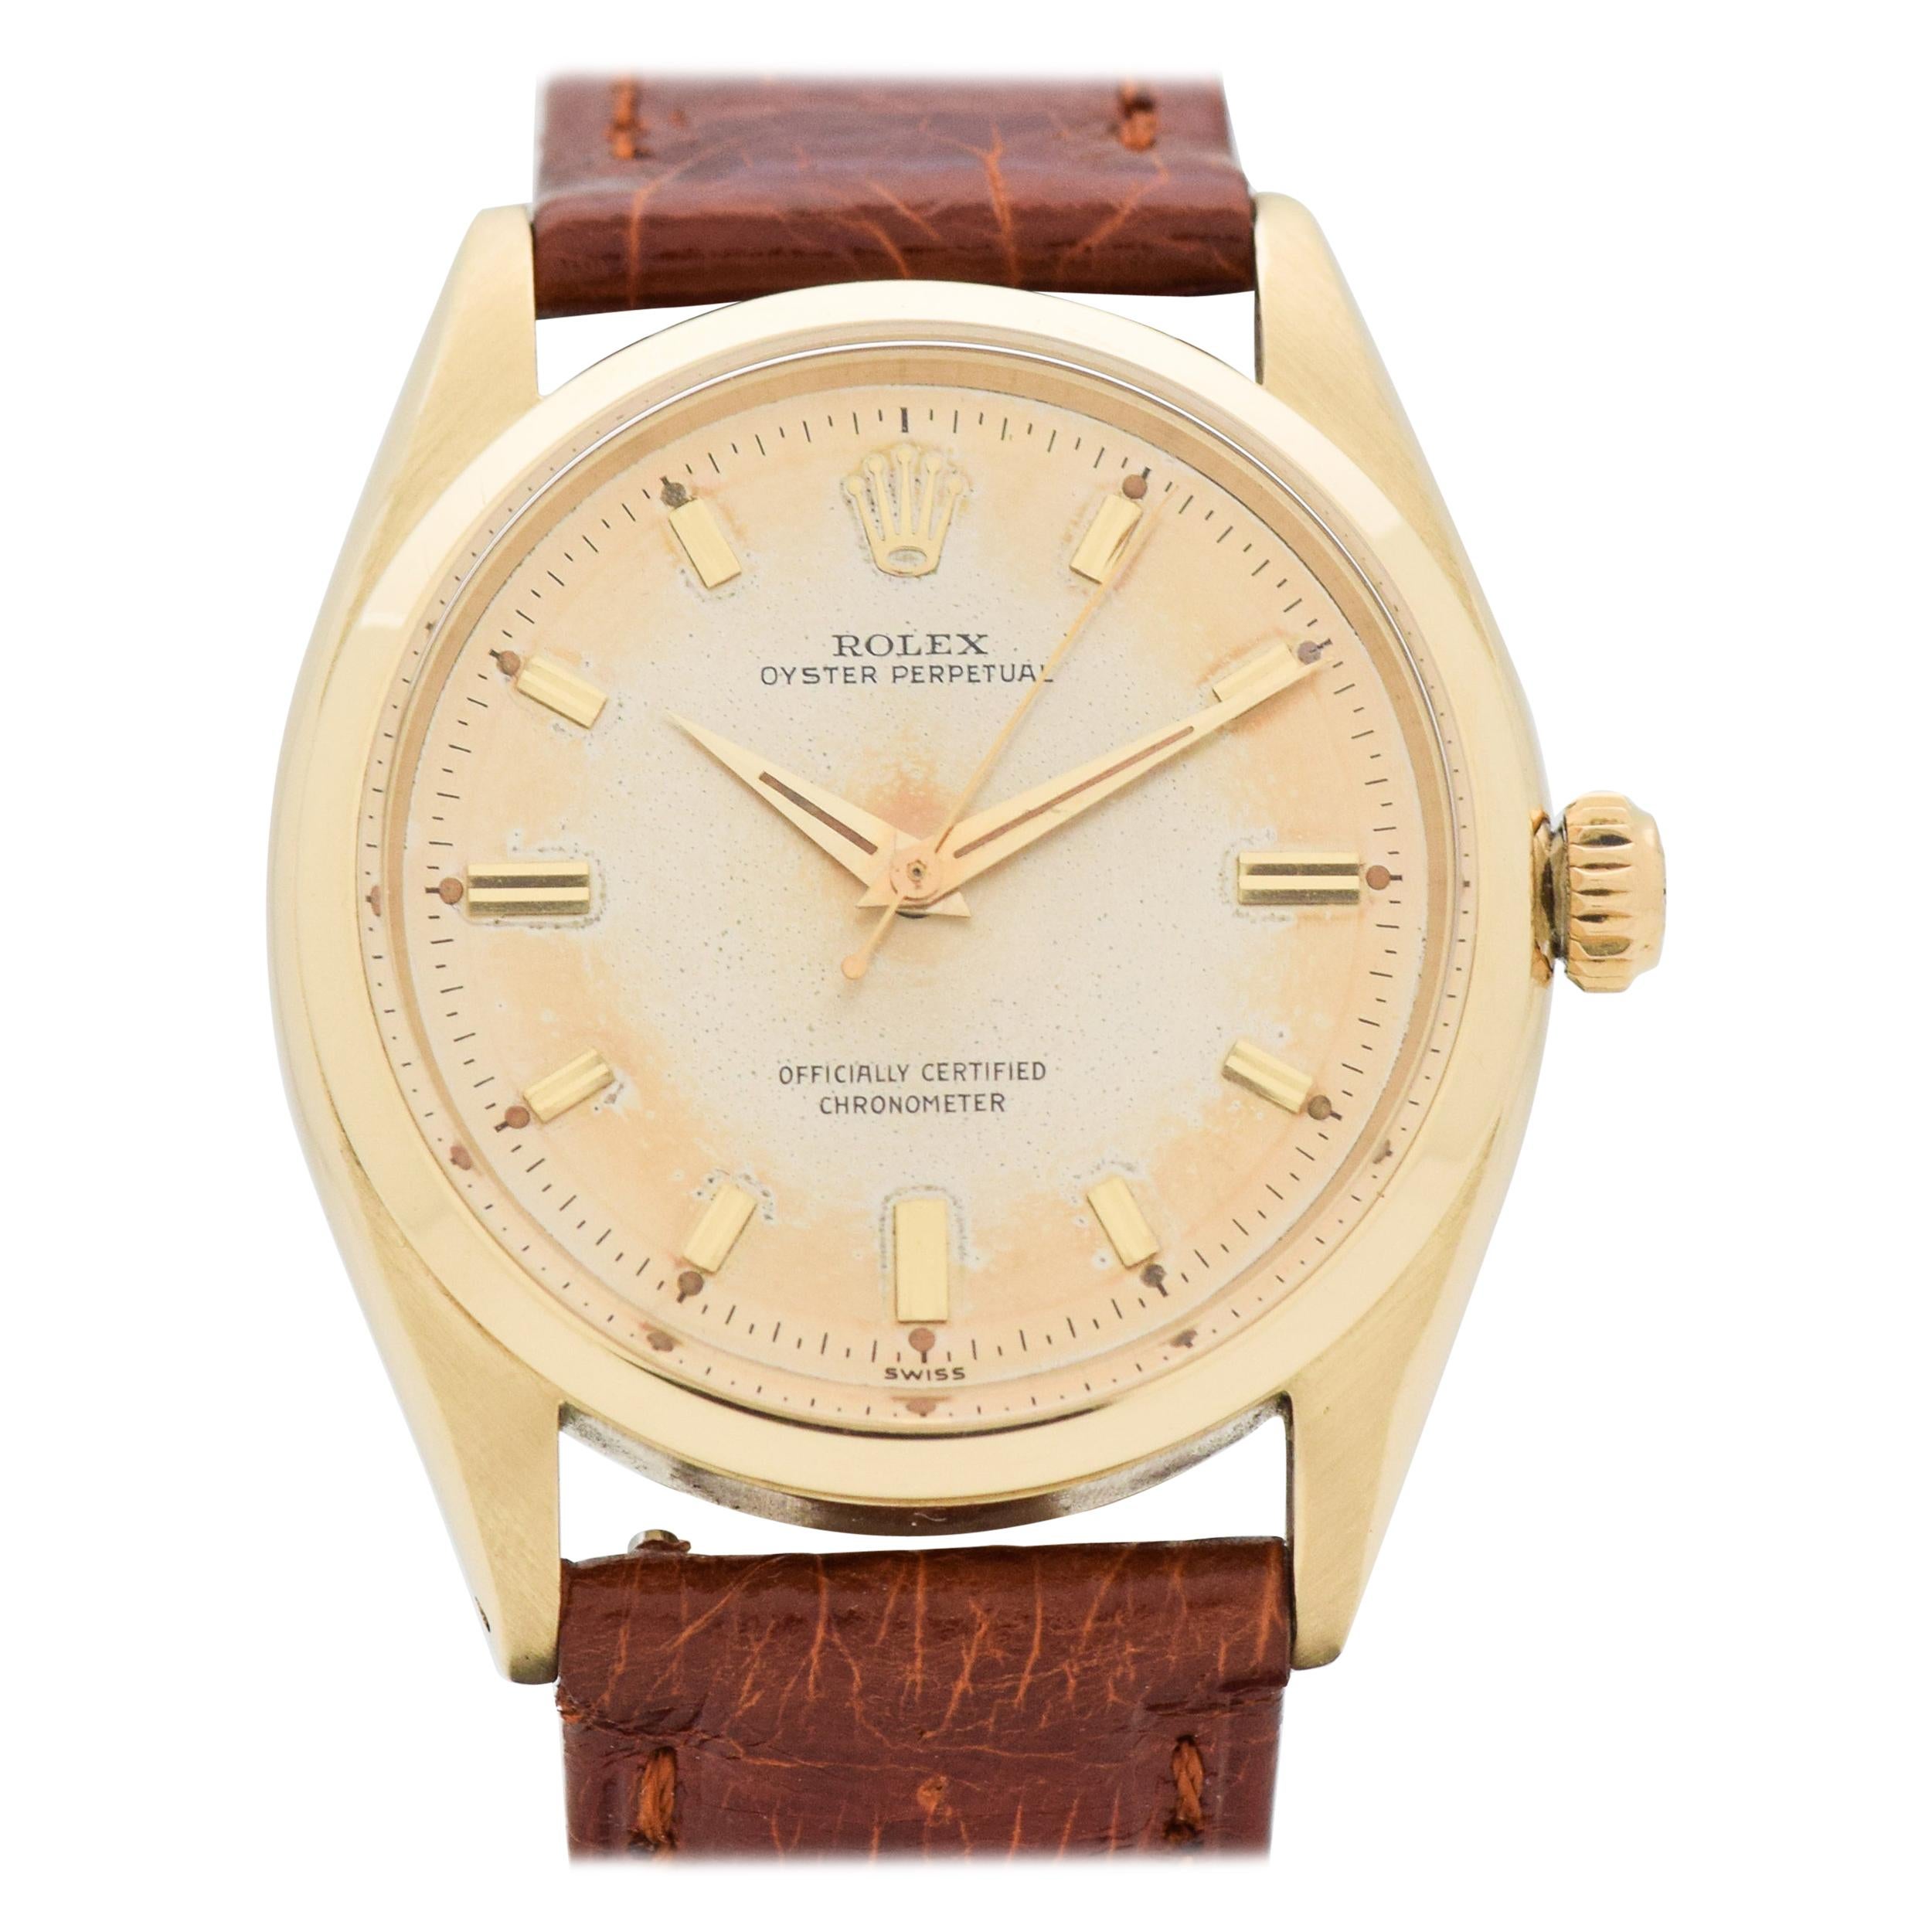 Vintage Rolex Oyster Perpetual 14 Karat Yellow Gold Watch, 1955 For Sale